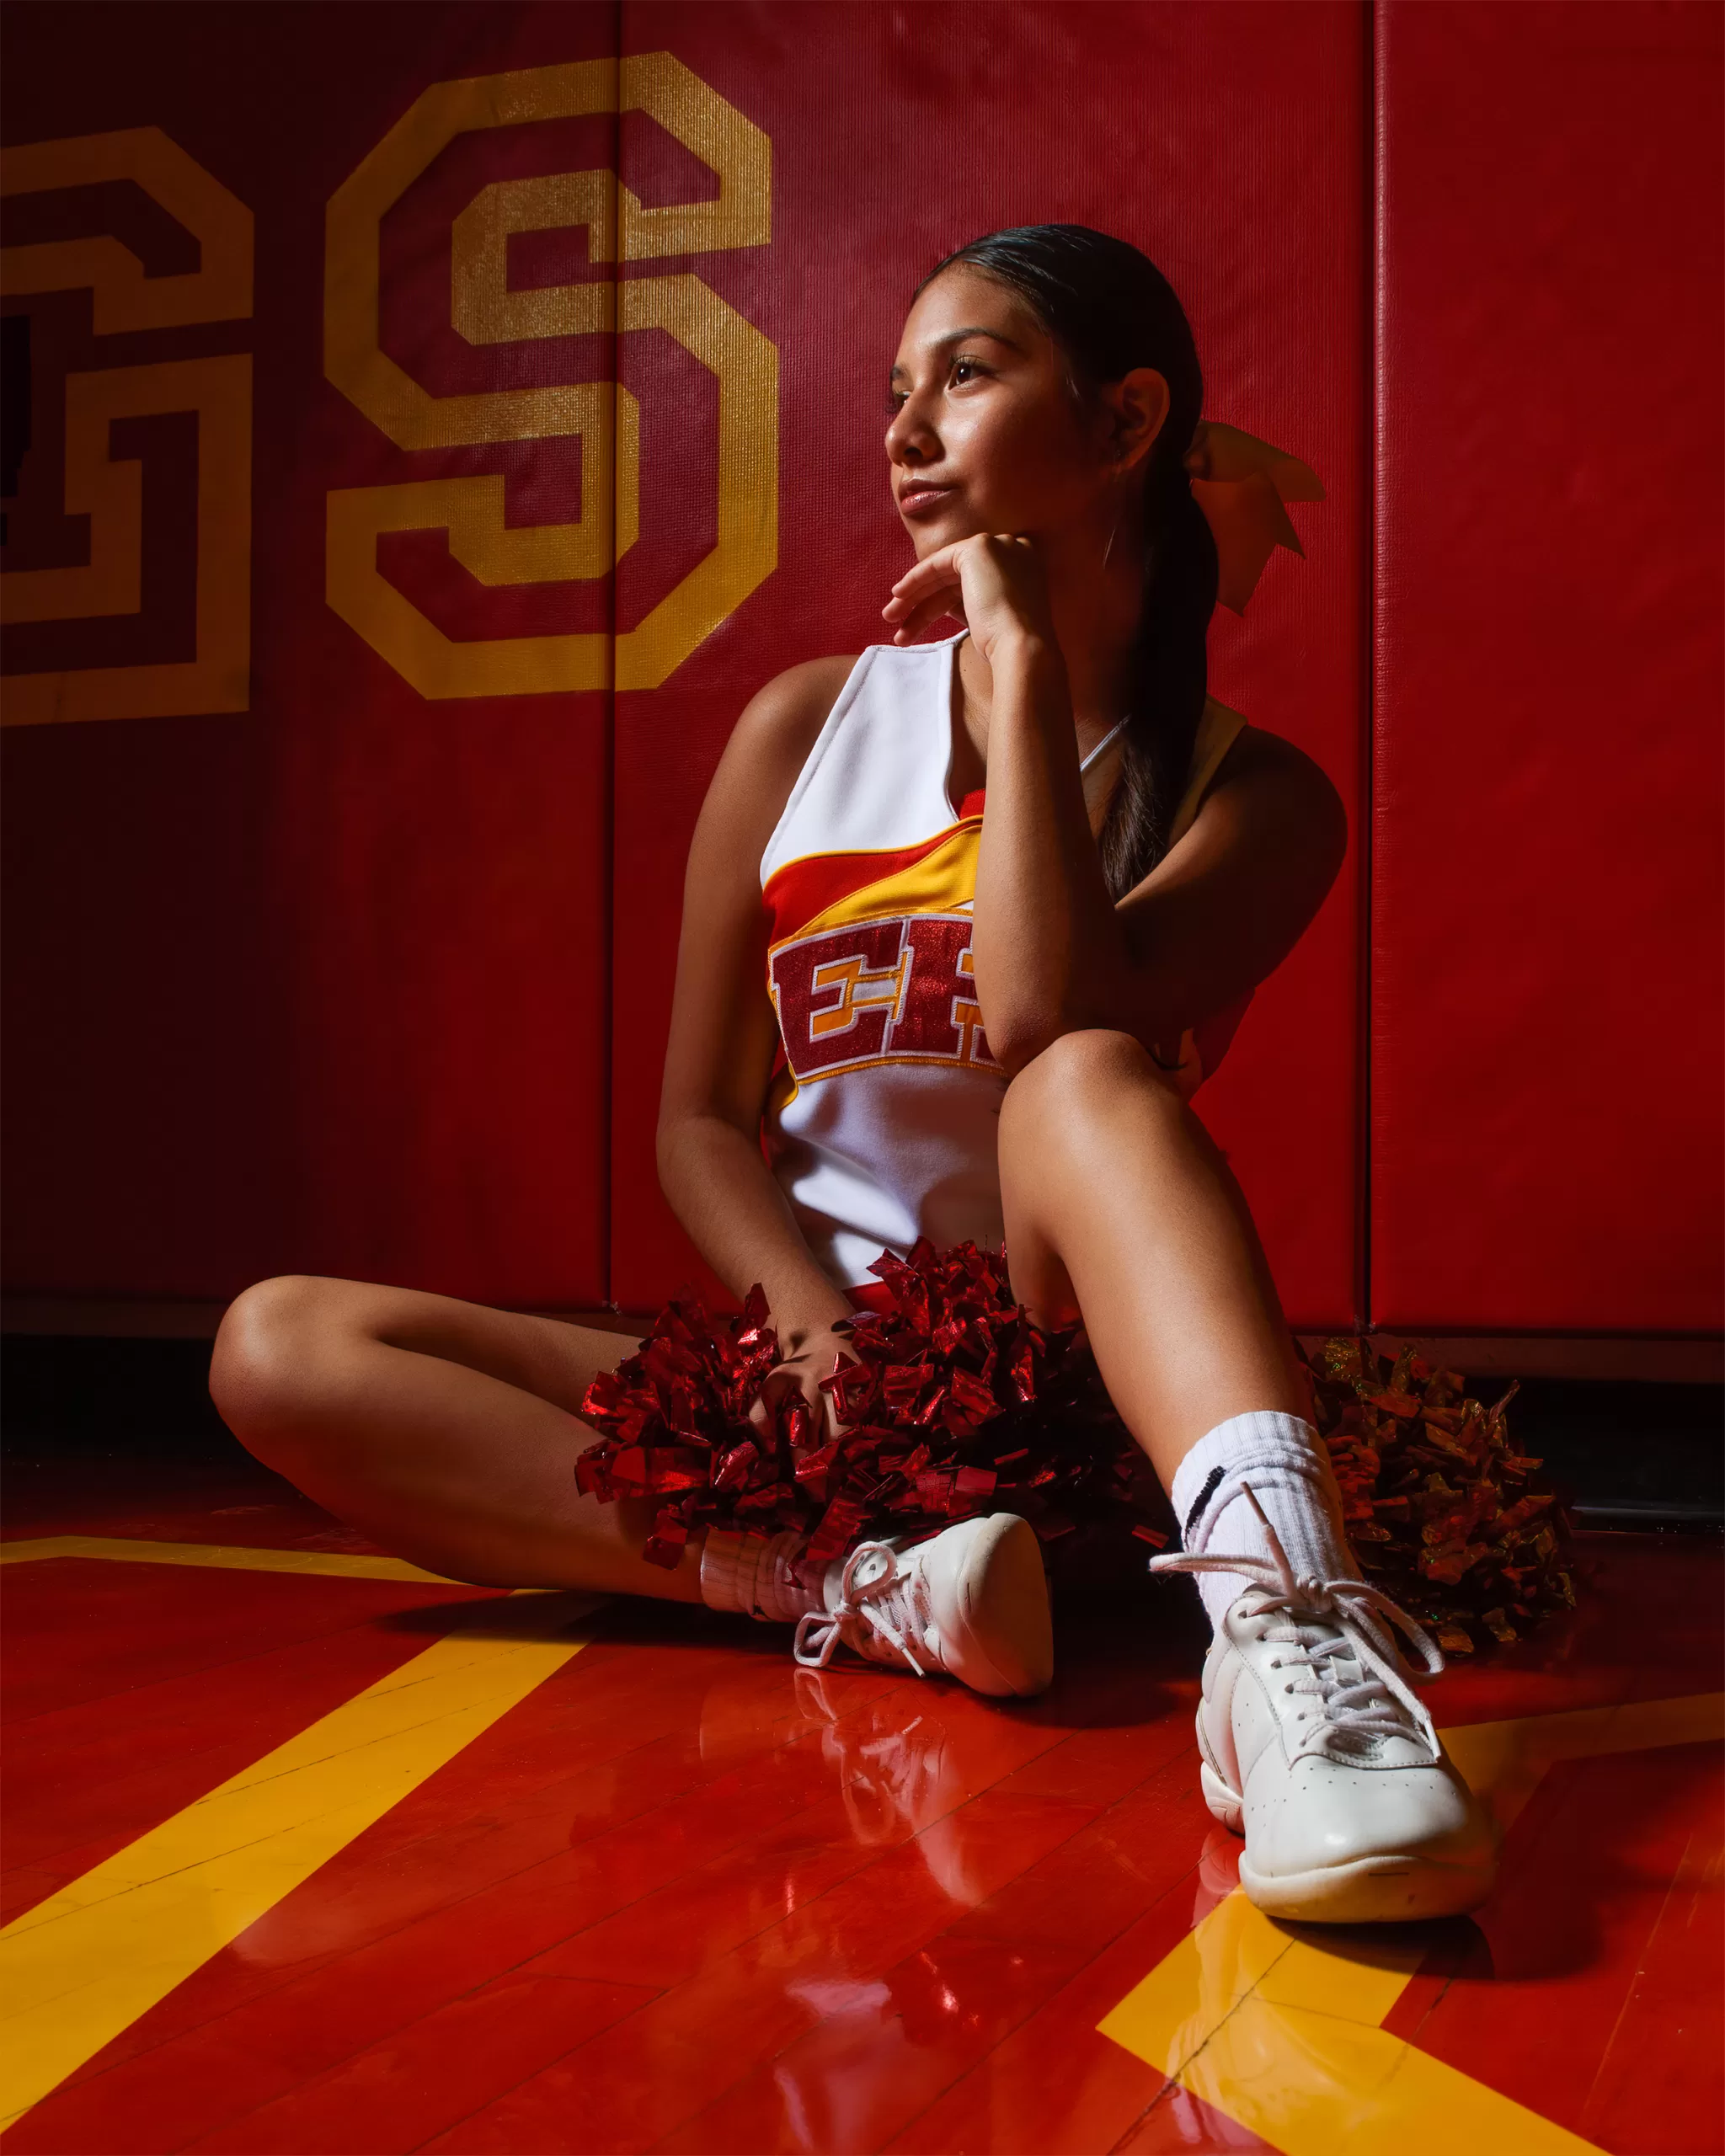 Cheerleader in the gym sitting on the floor.